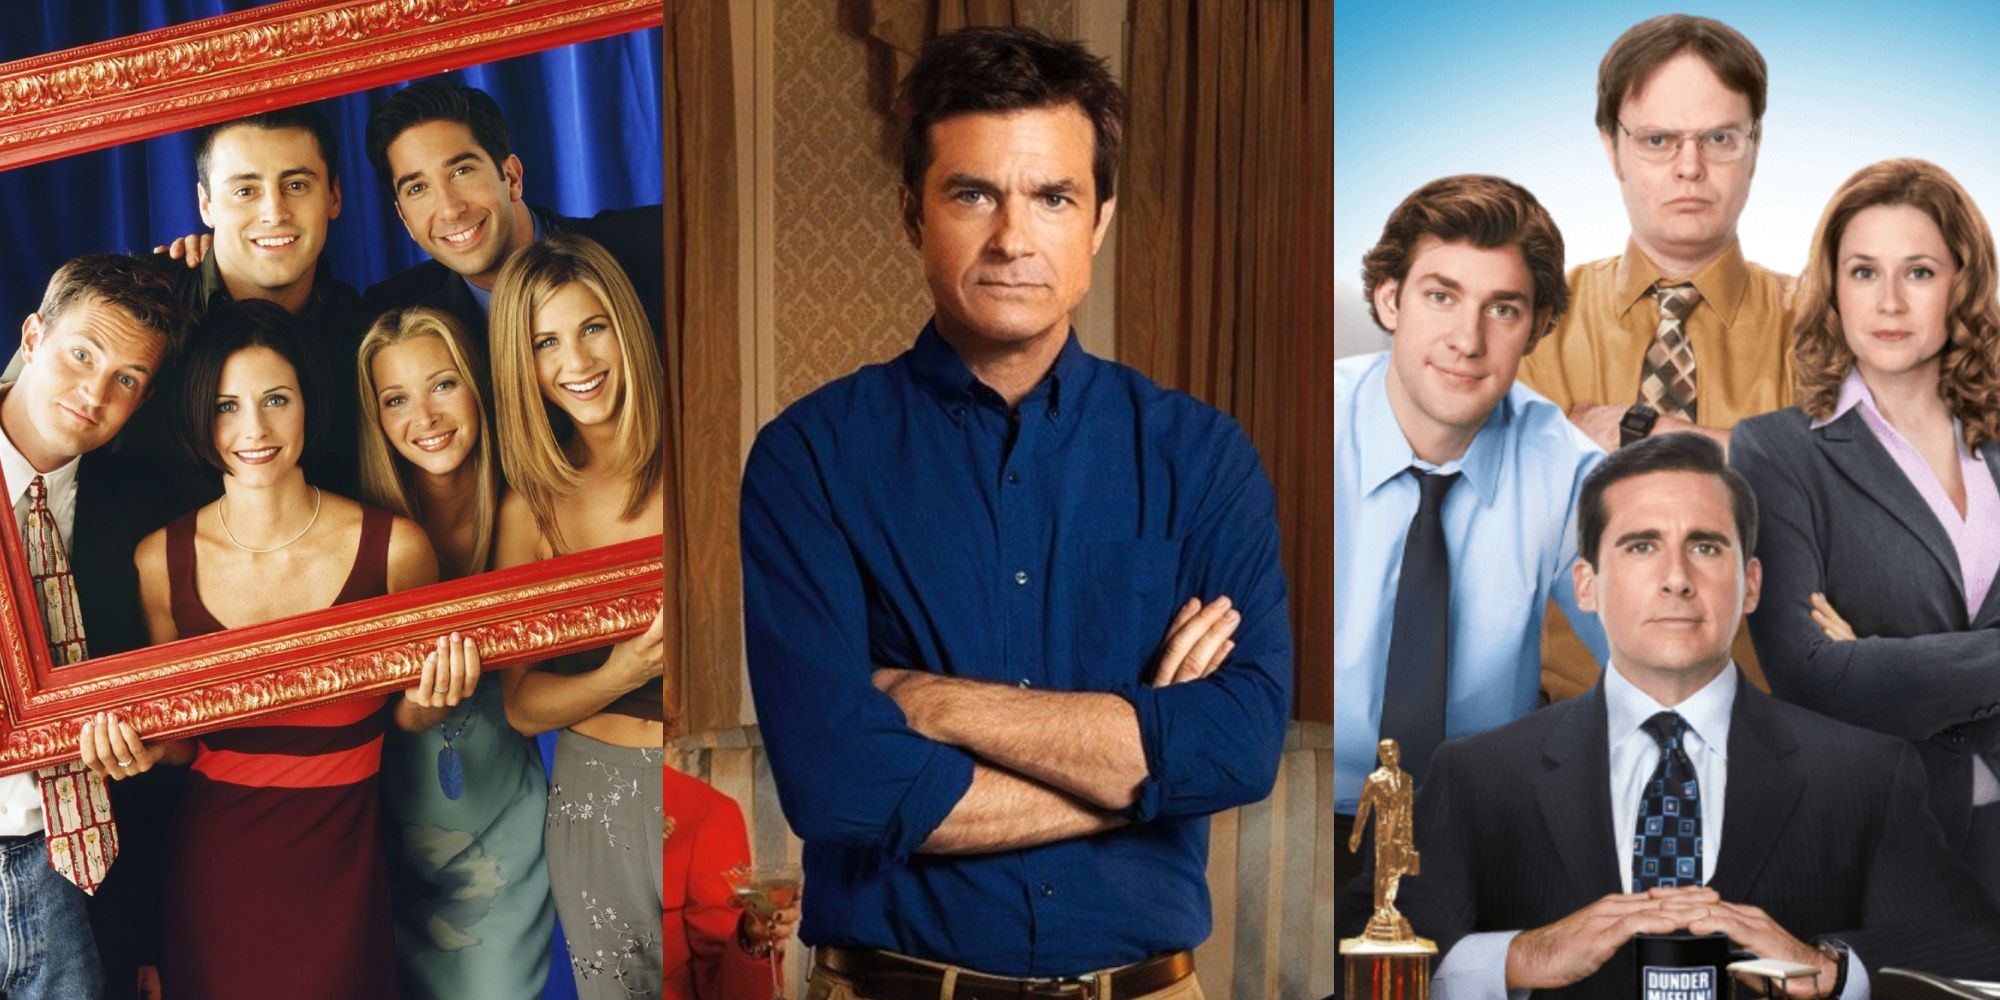 Comedy Series Emmy Winners With The Lowest Rotten Tomatoes Scores